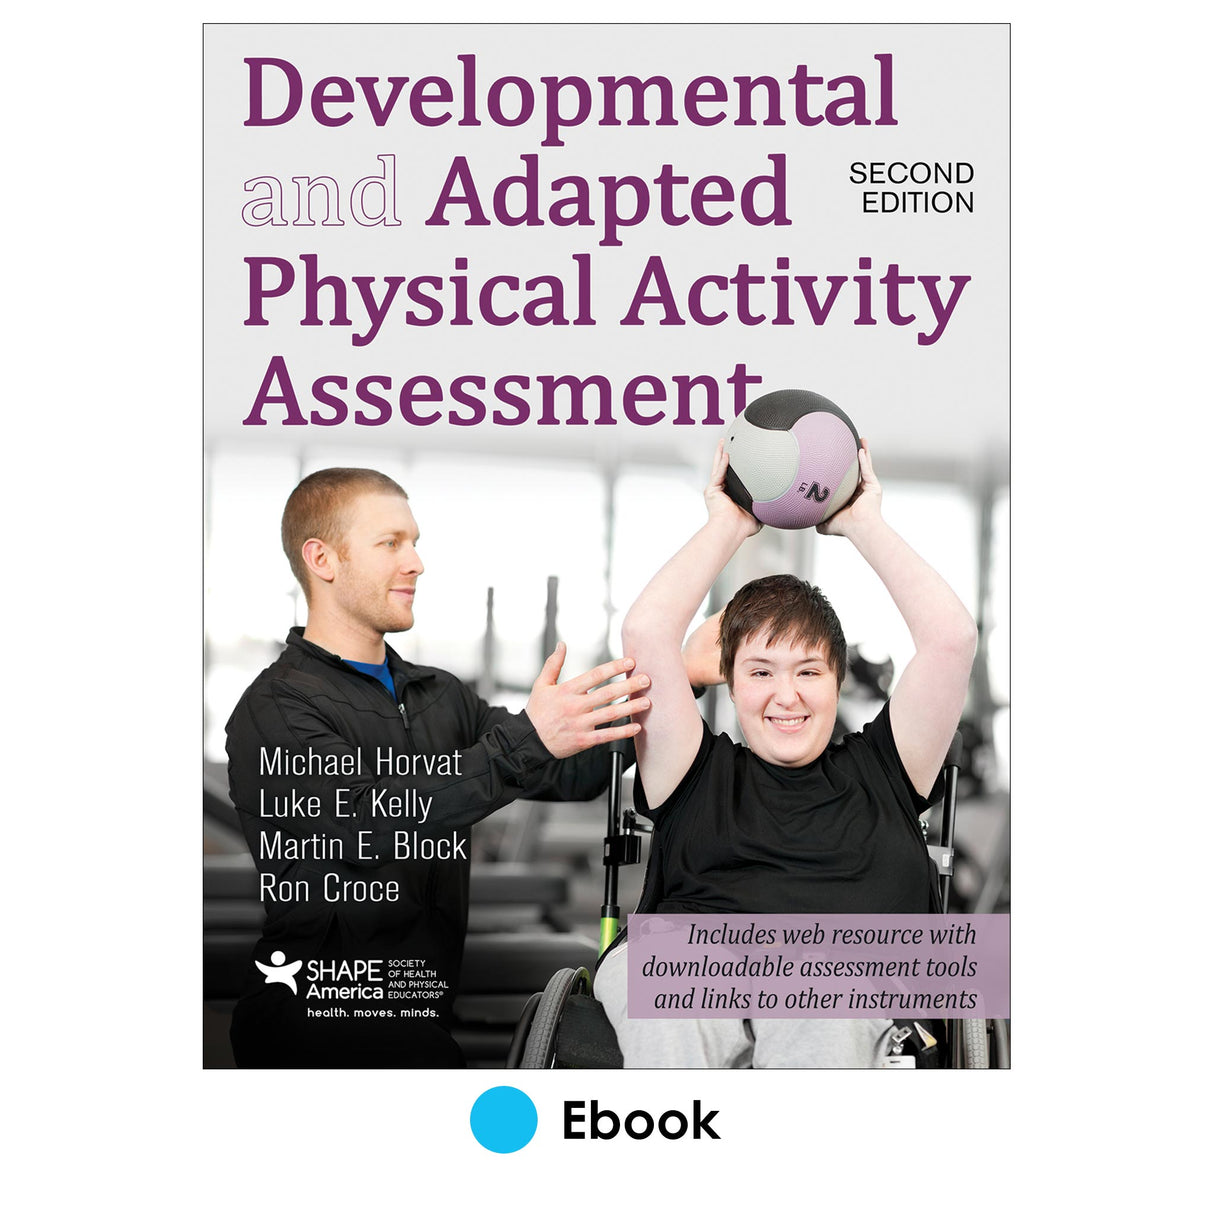 Developmental and Adapted Physical Activity Assessment 2nd Edition PDF With Web Resource